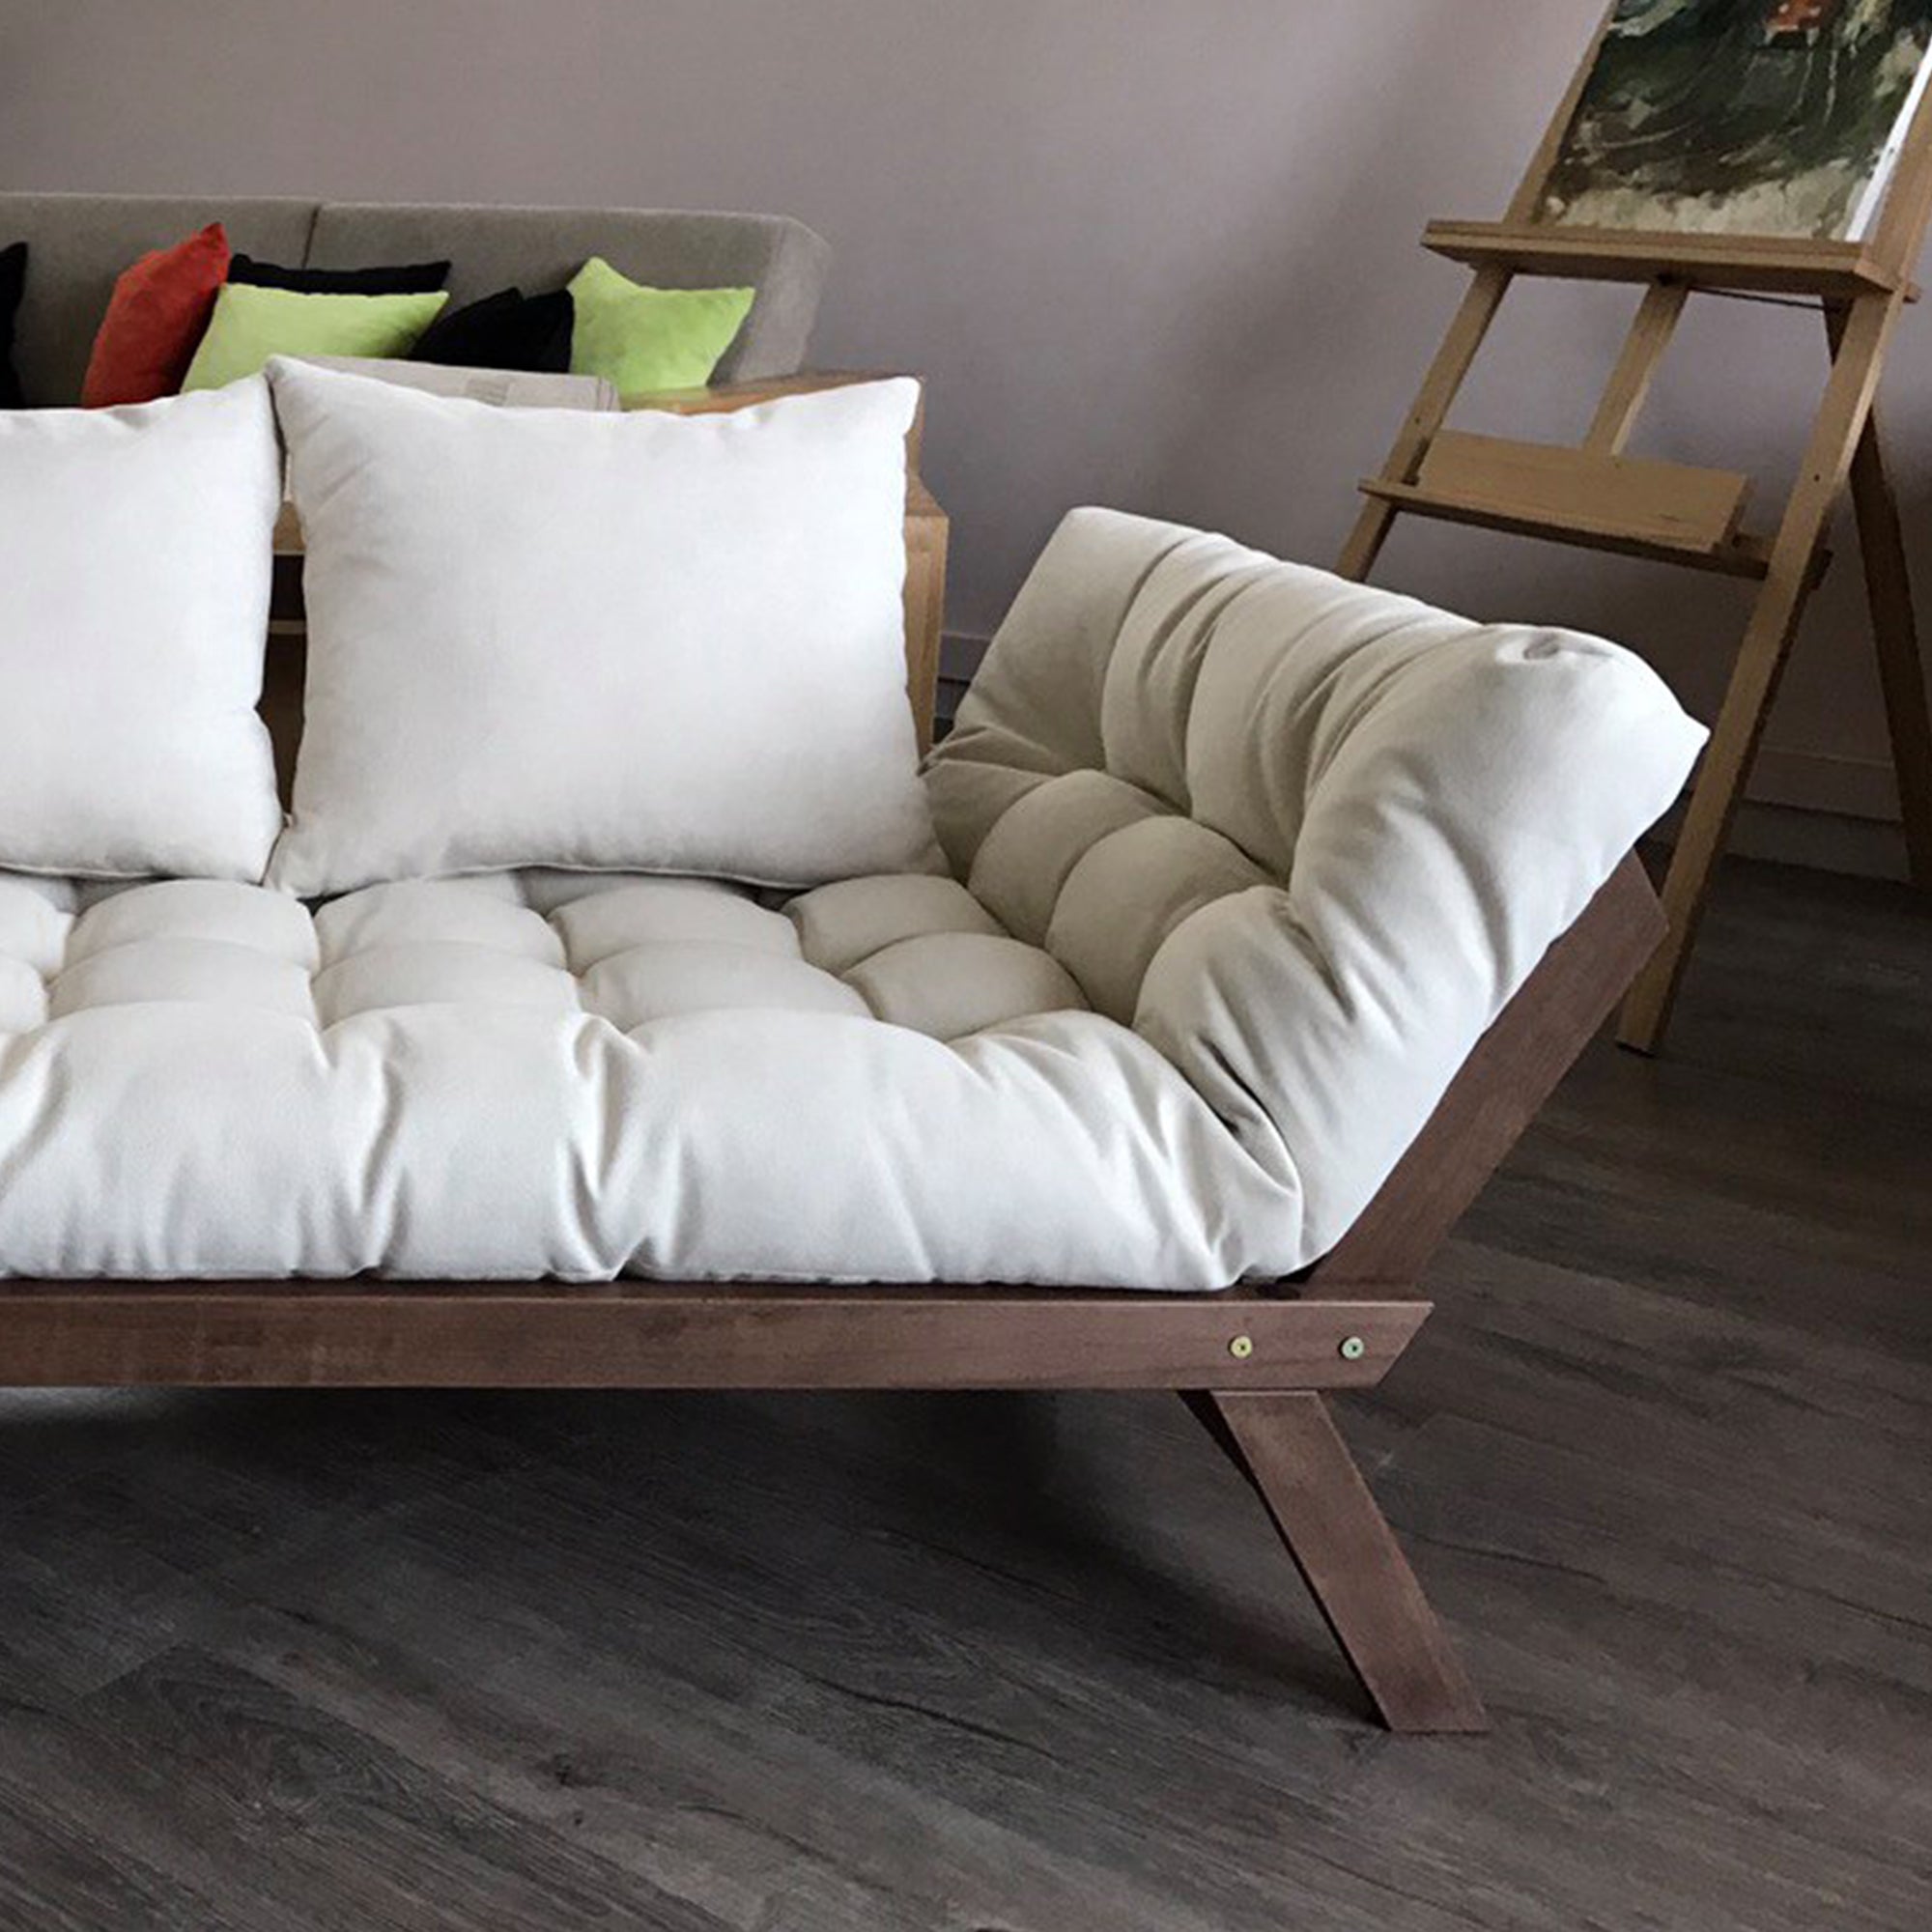 ALLEGRO Folding Sofa Bed, Beech Wood Frame, Walnut Colour upholstery creamy interior crop view